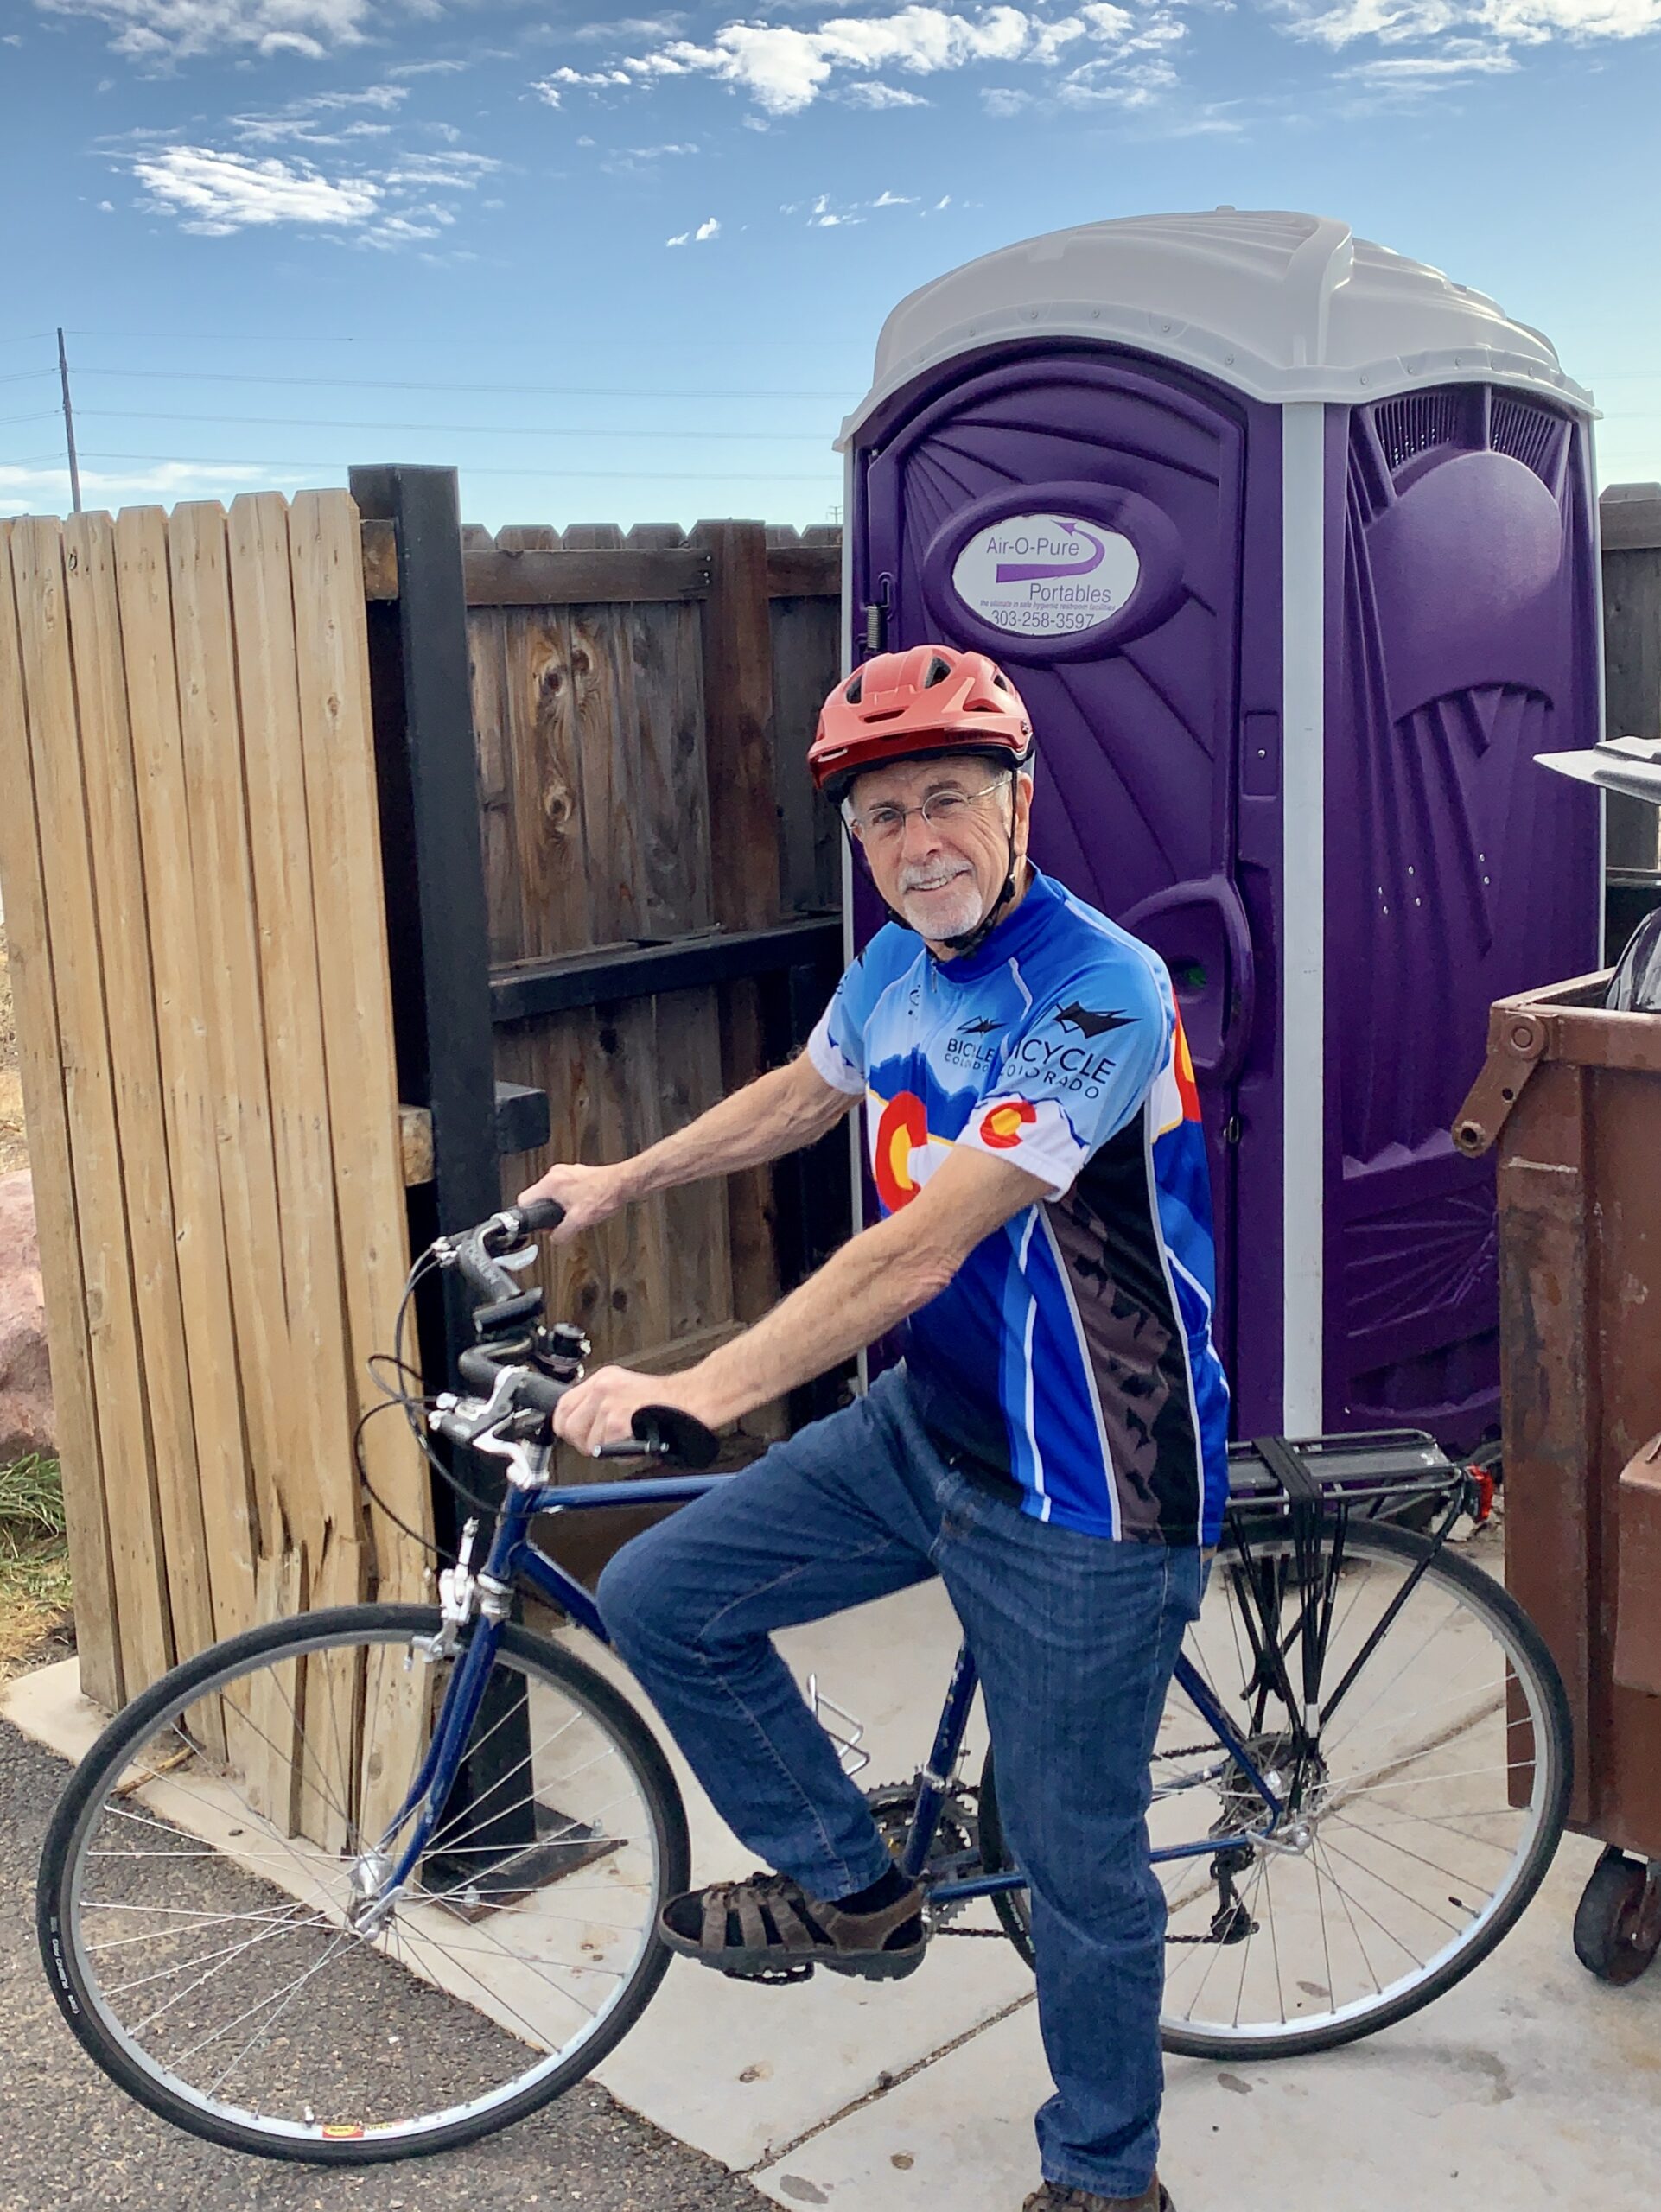 Biking Boulderites turn to toilets to increase access, build goodwill